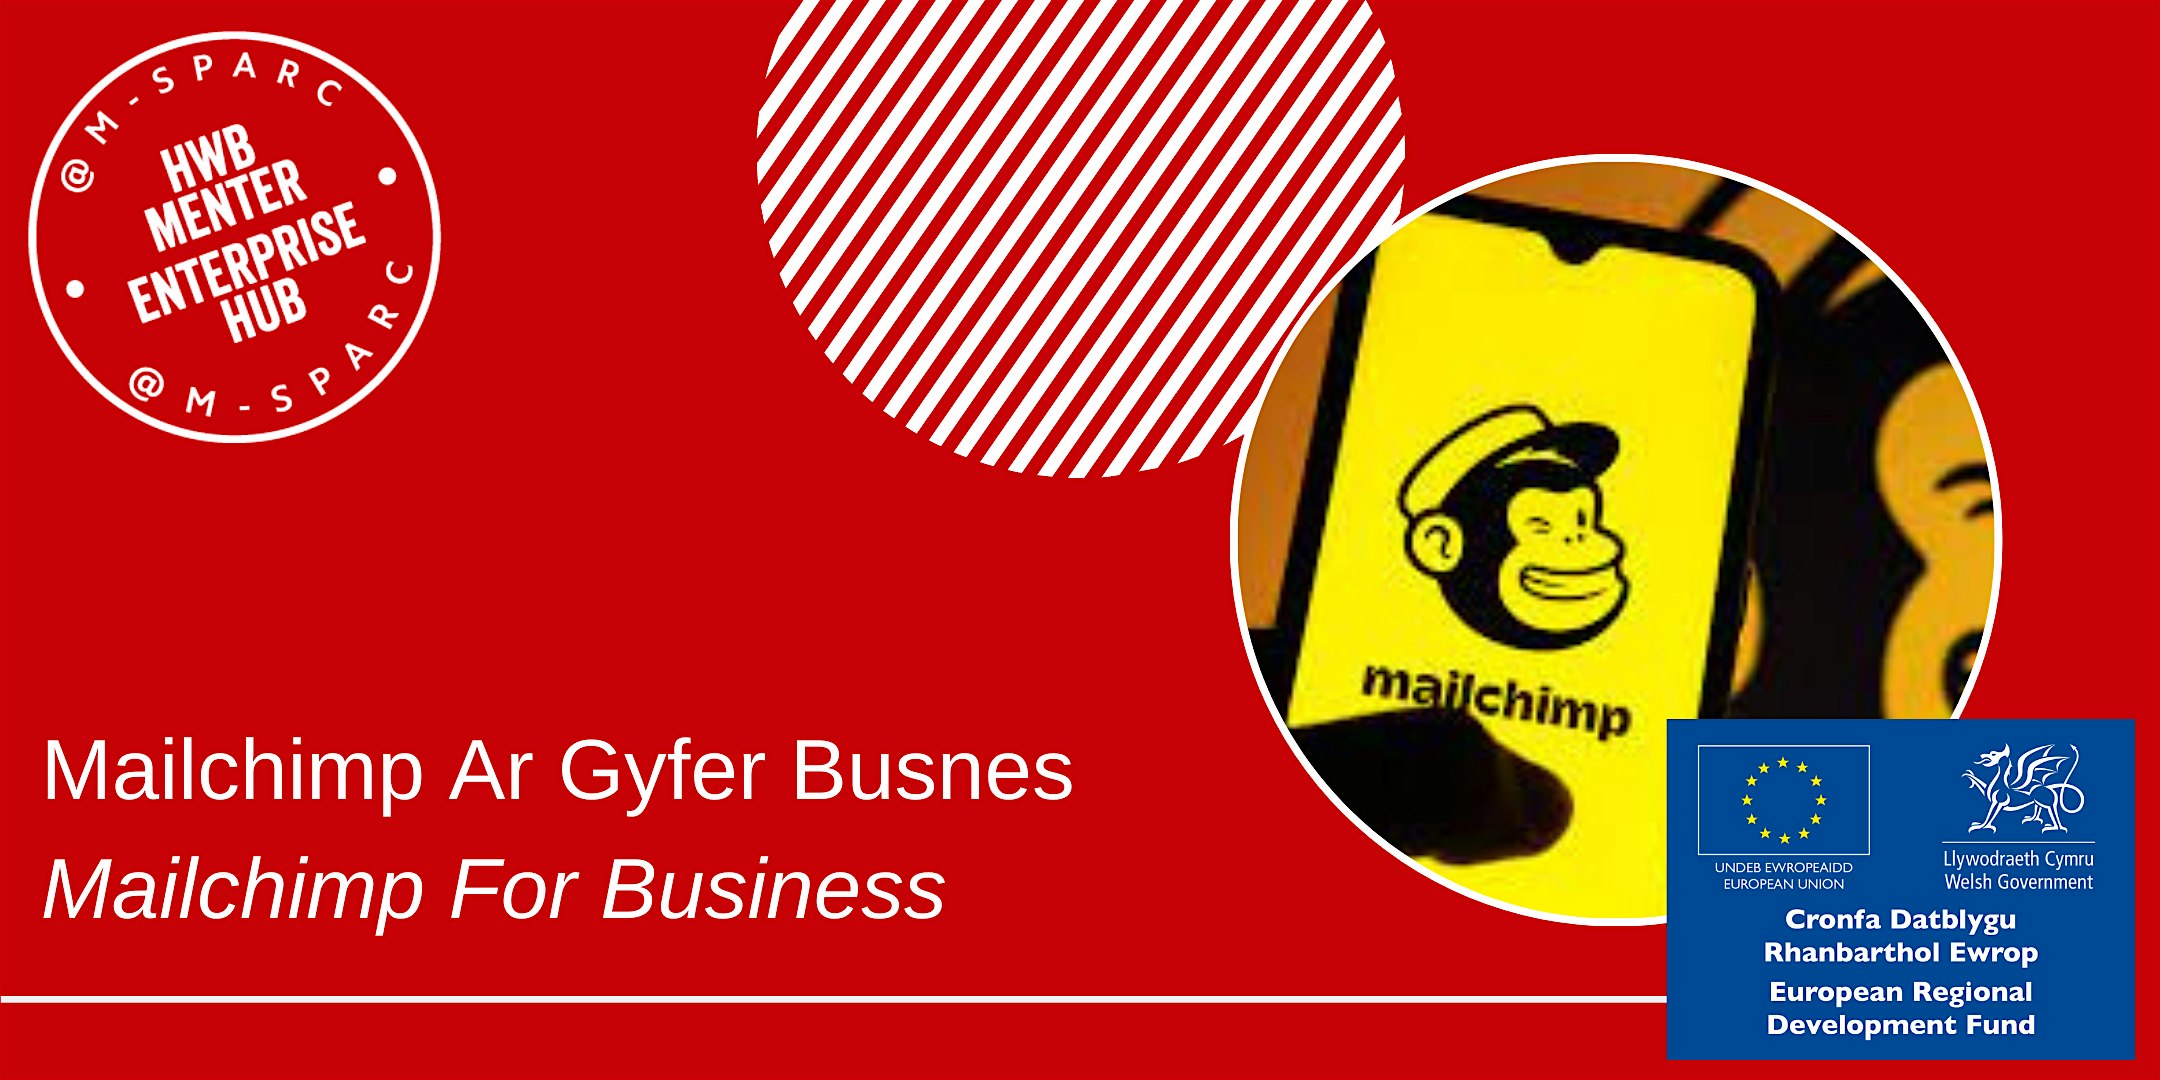 IN PERSON - Mailchimp Ar Gyfer Busnes // Mailchimp For Business